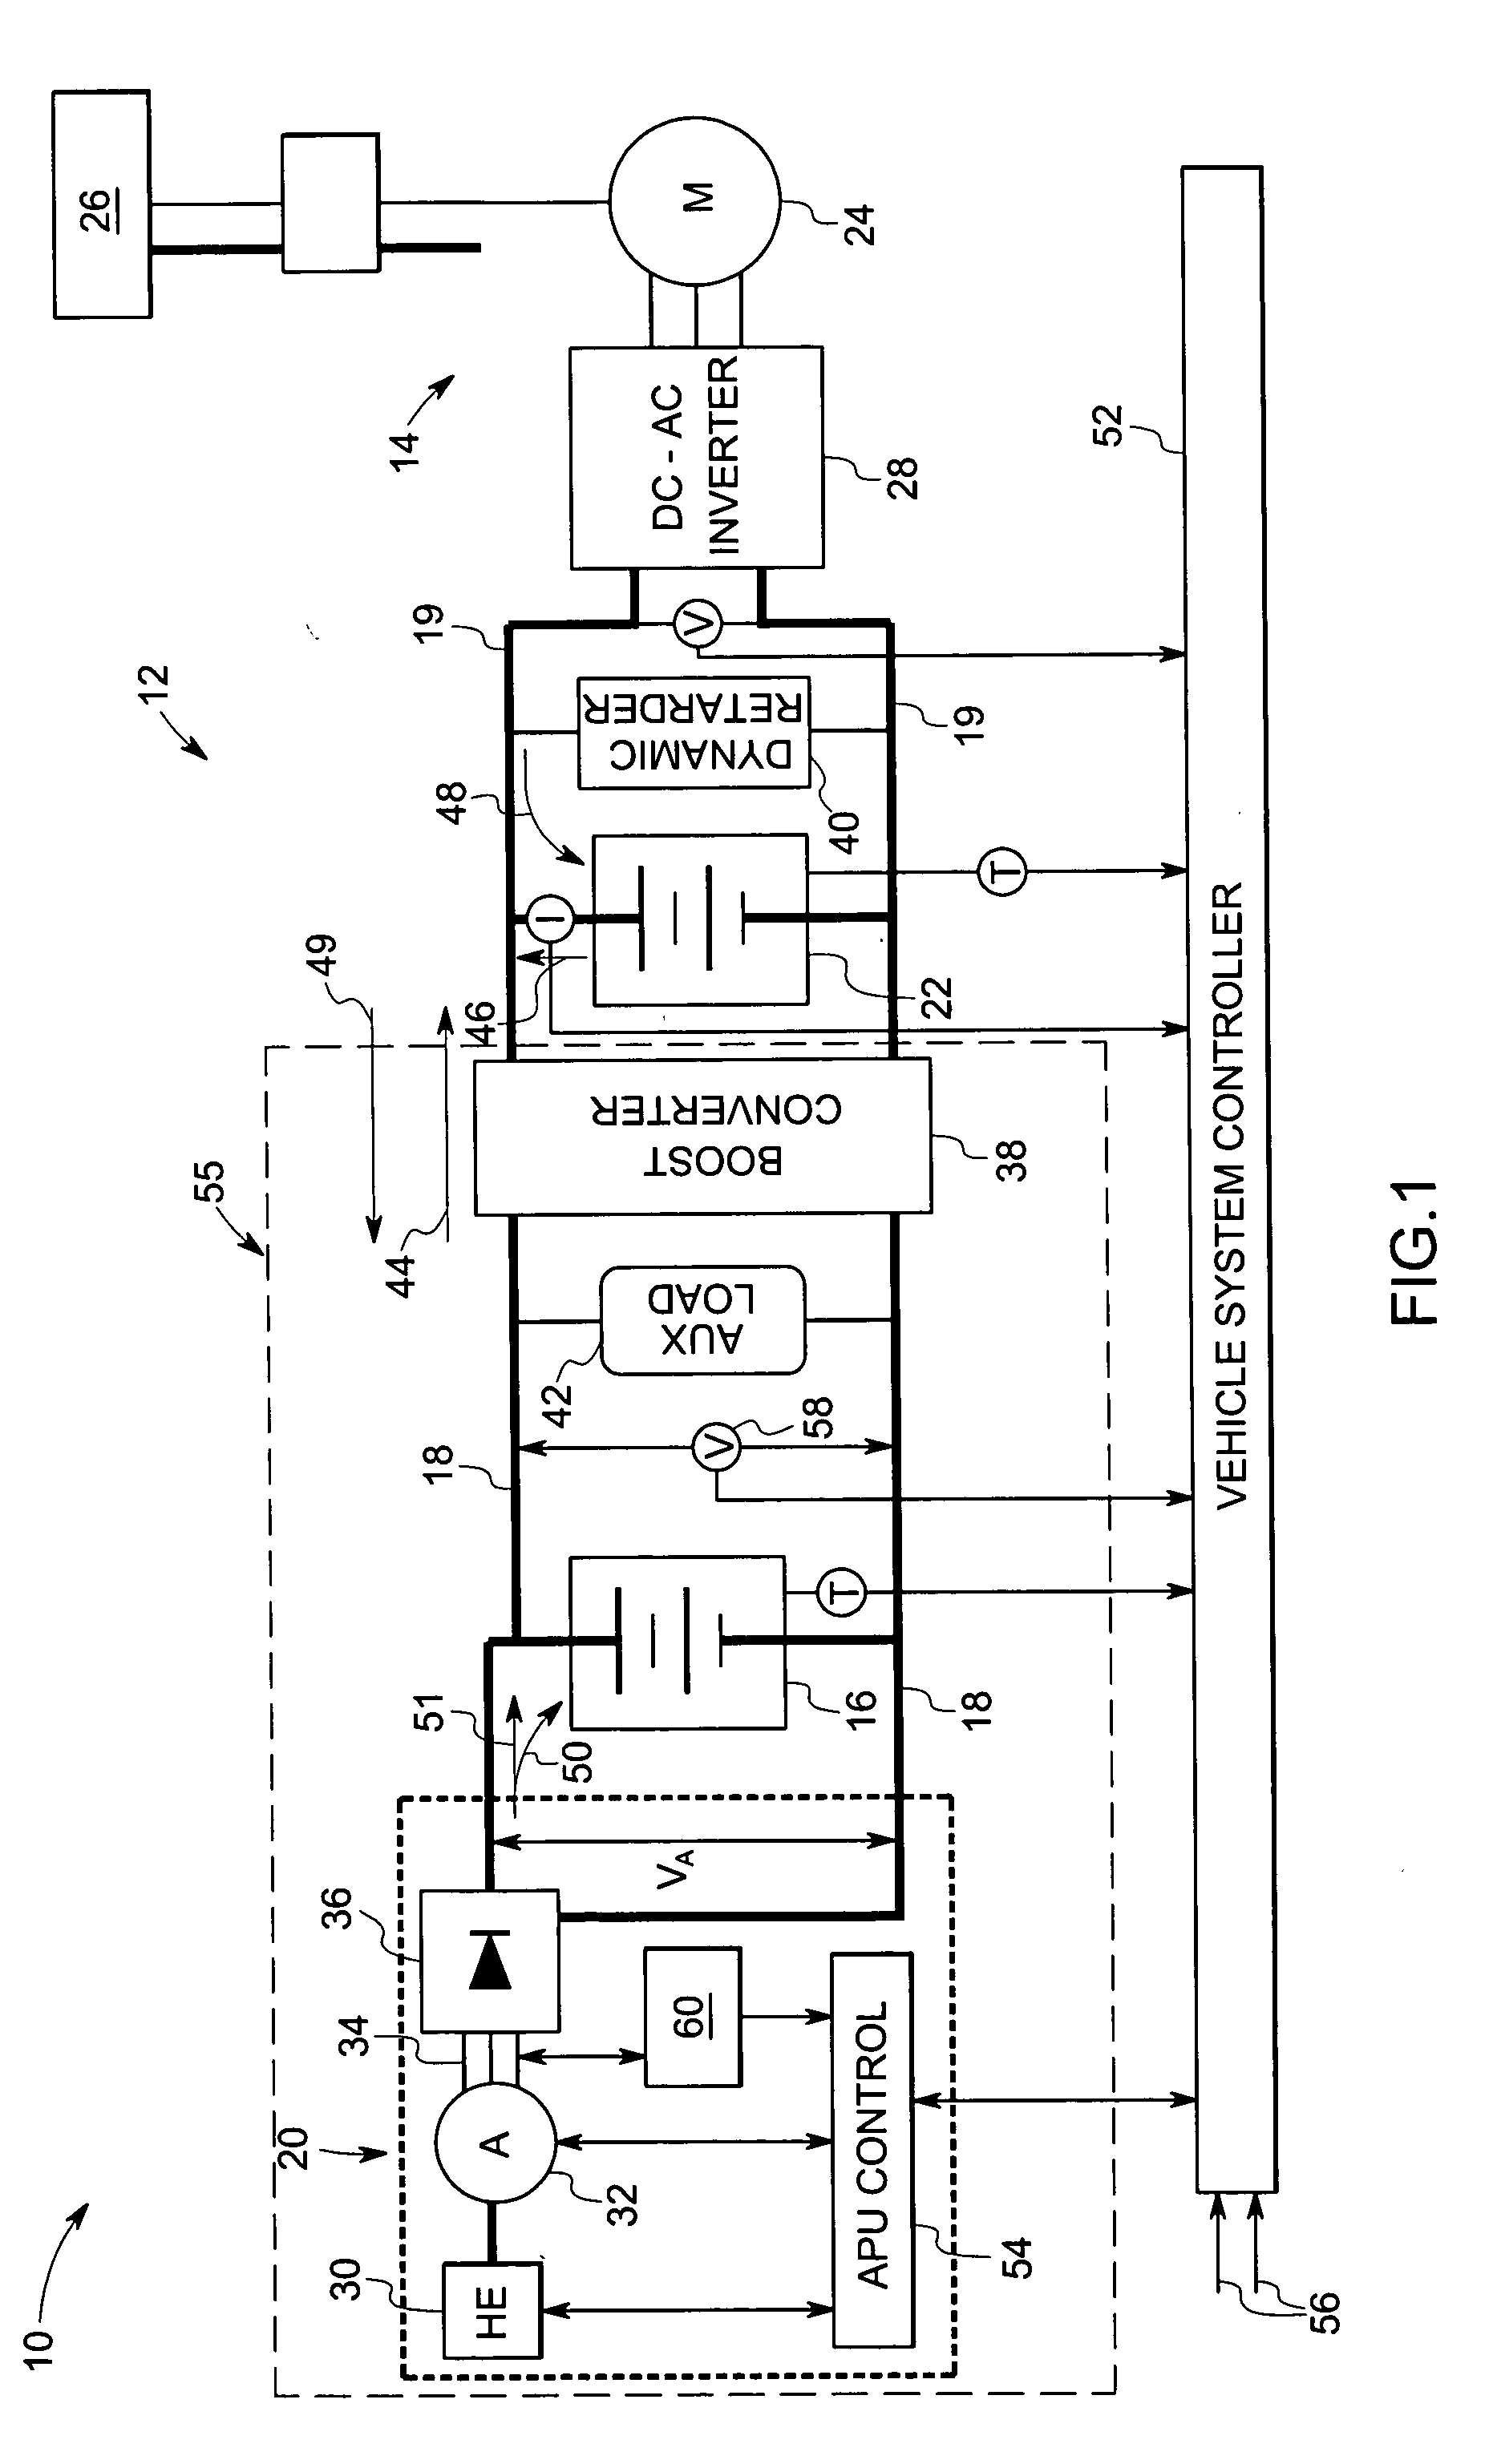 Hybrid electric propulsion system and method